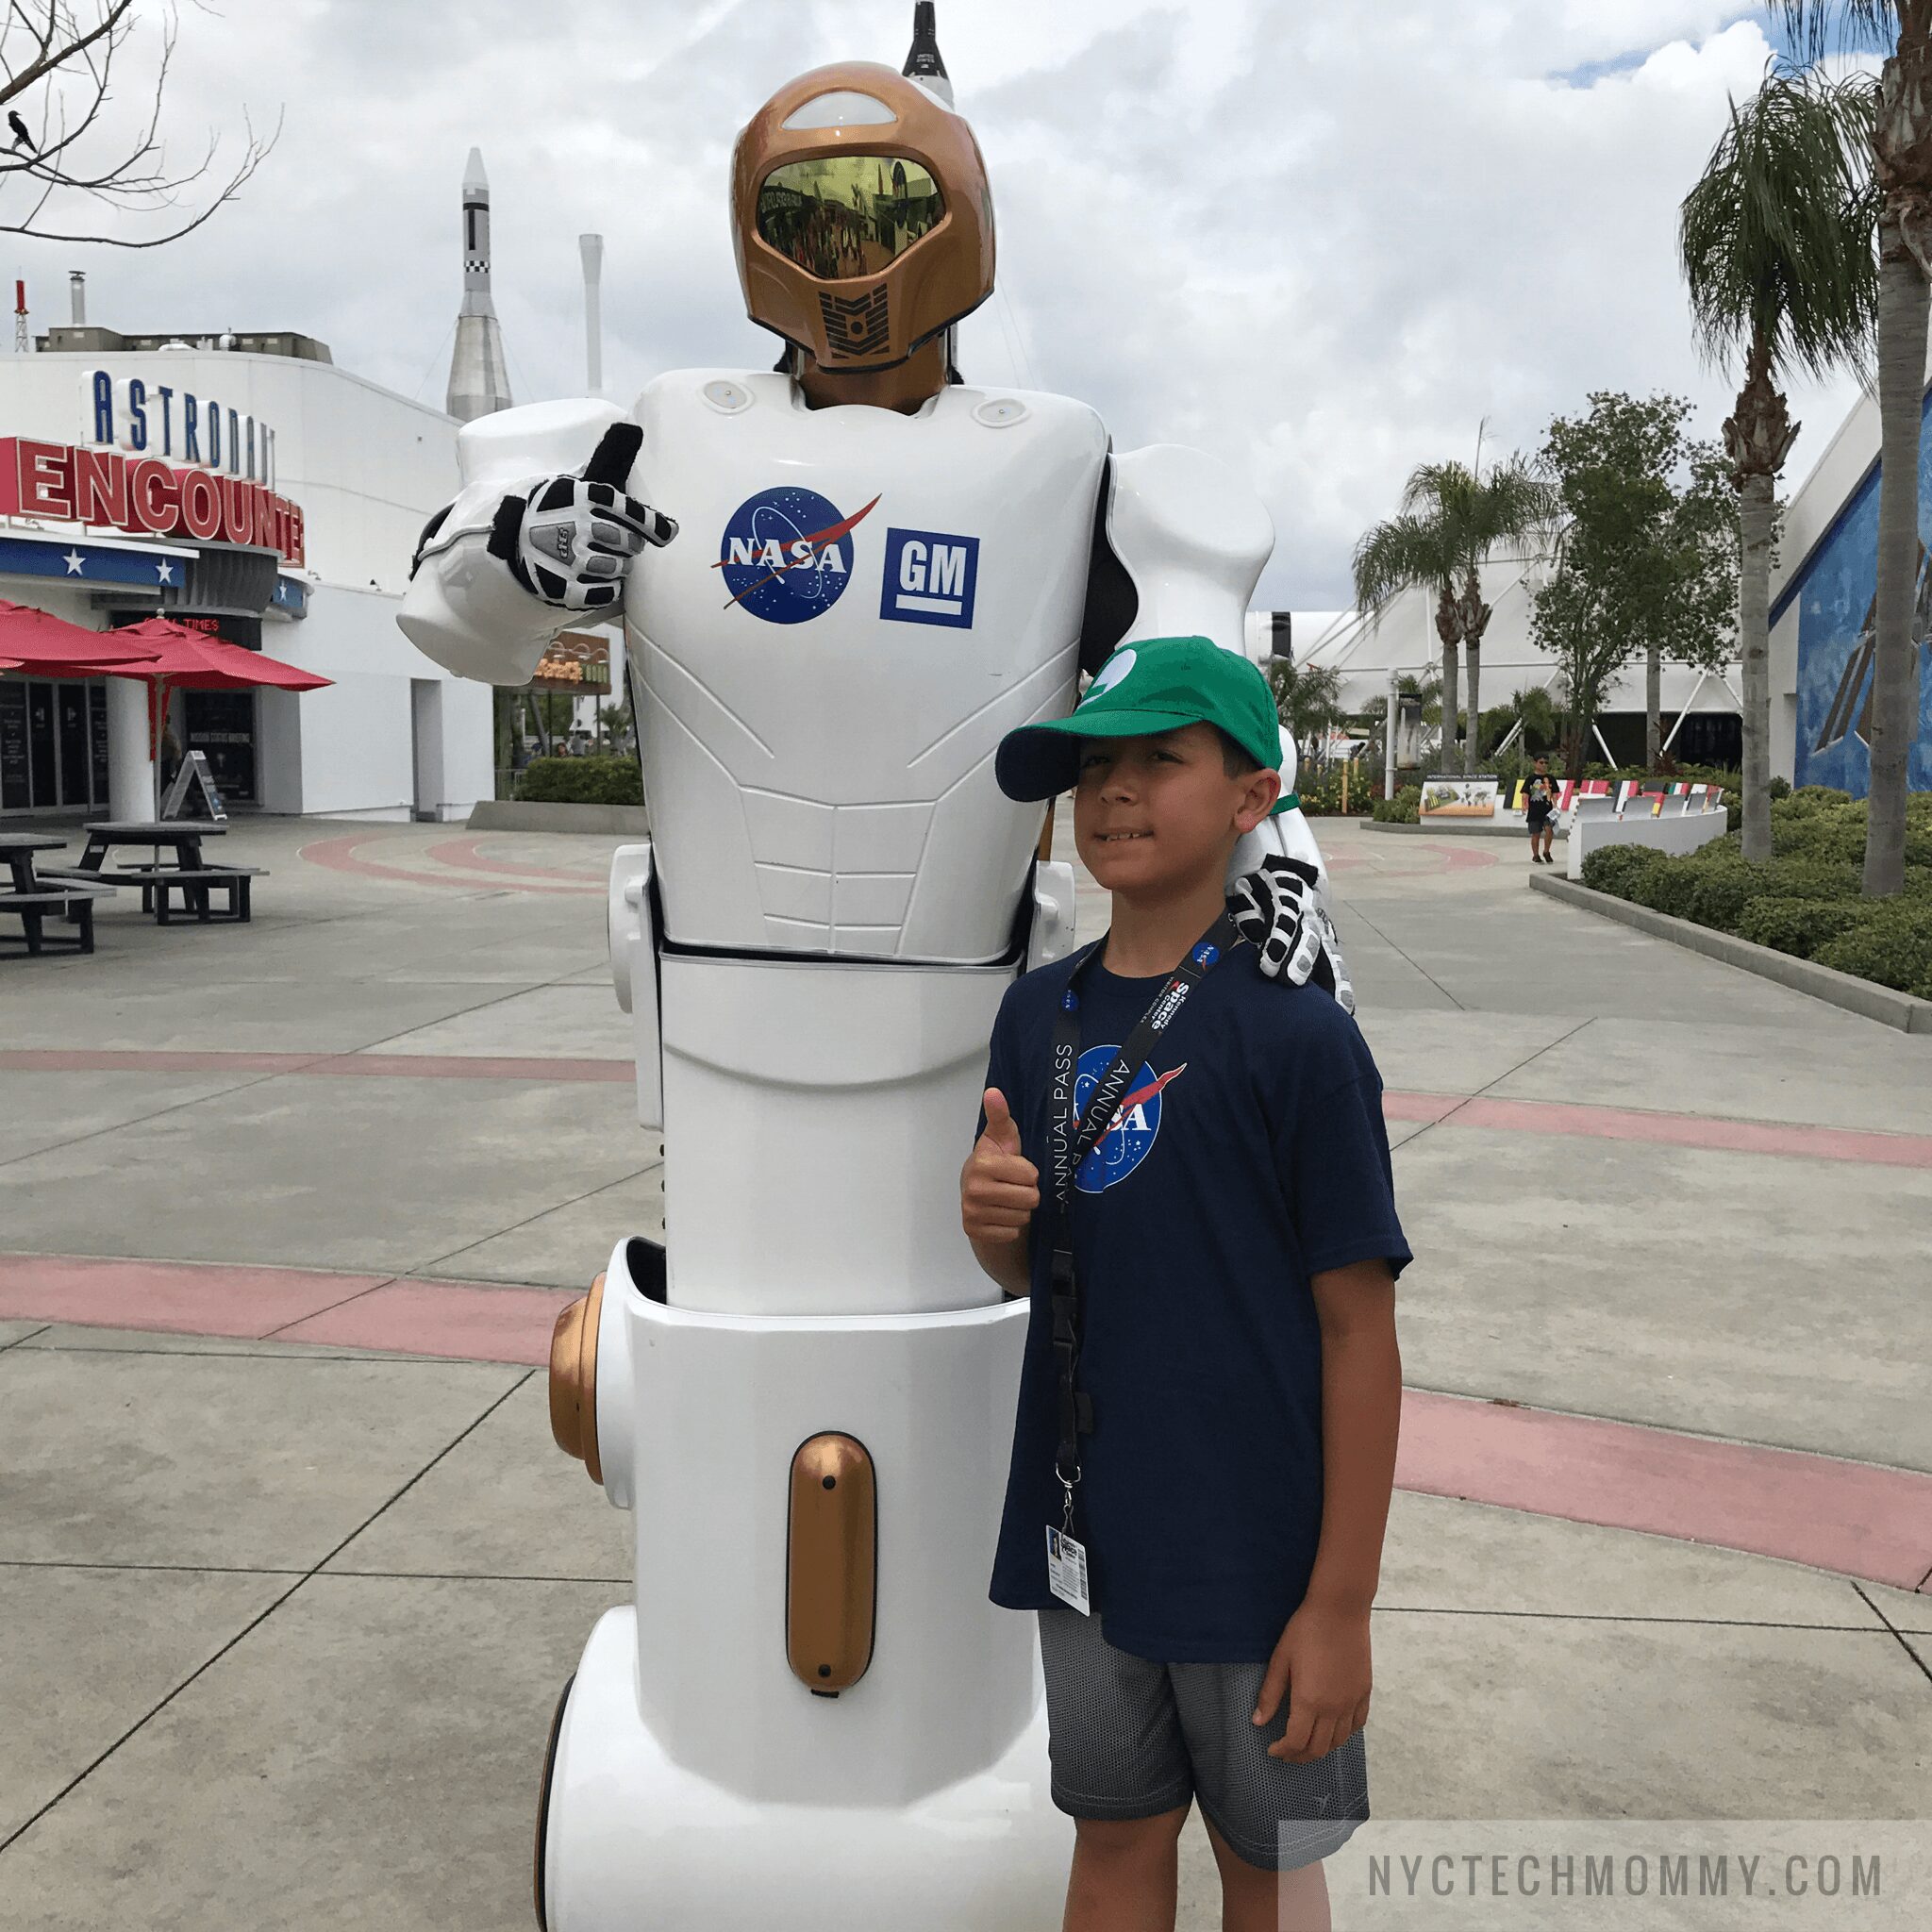 Visiting Kennedy Space Center with Kids